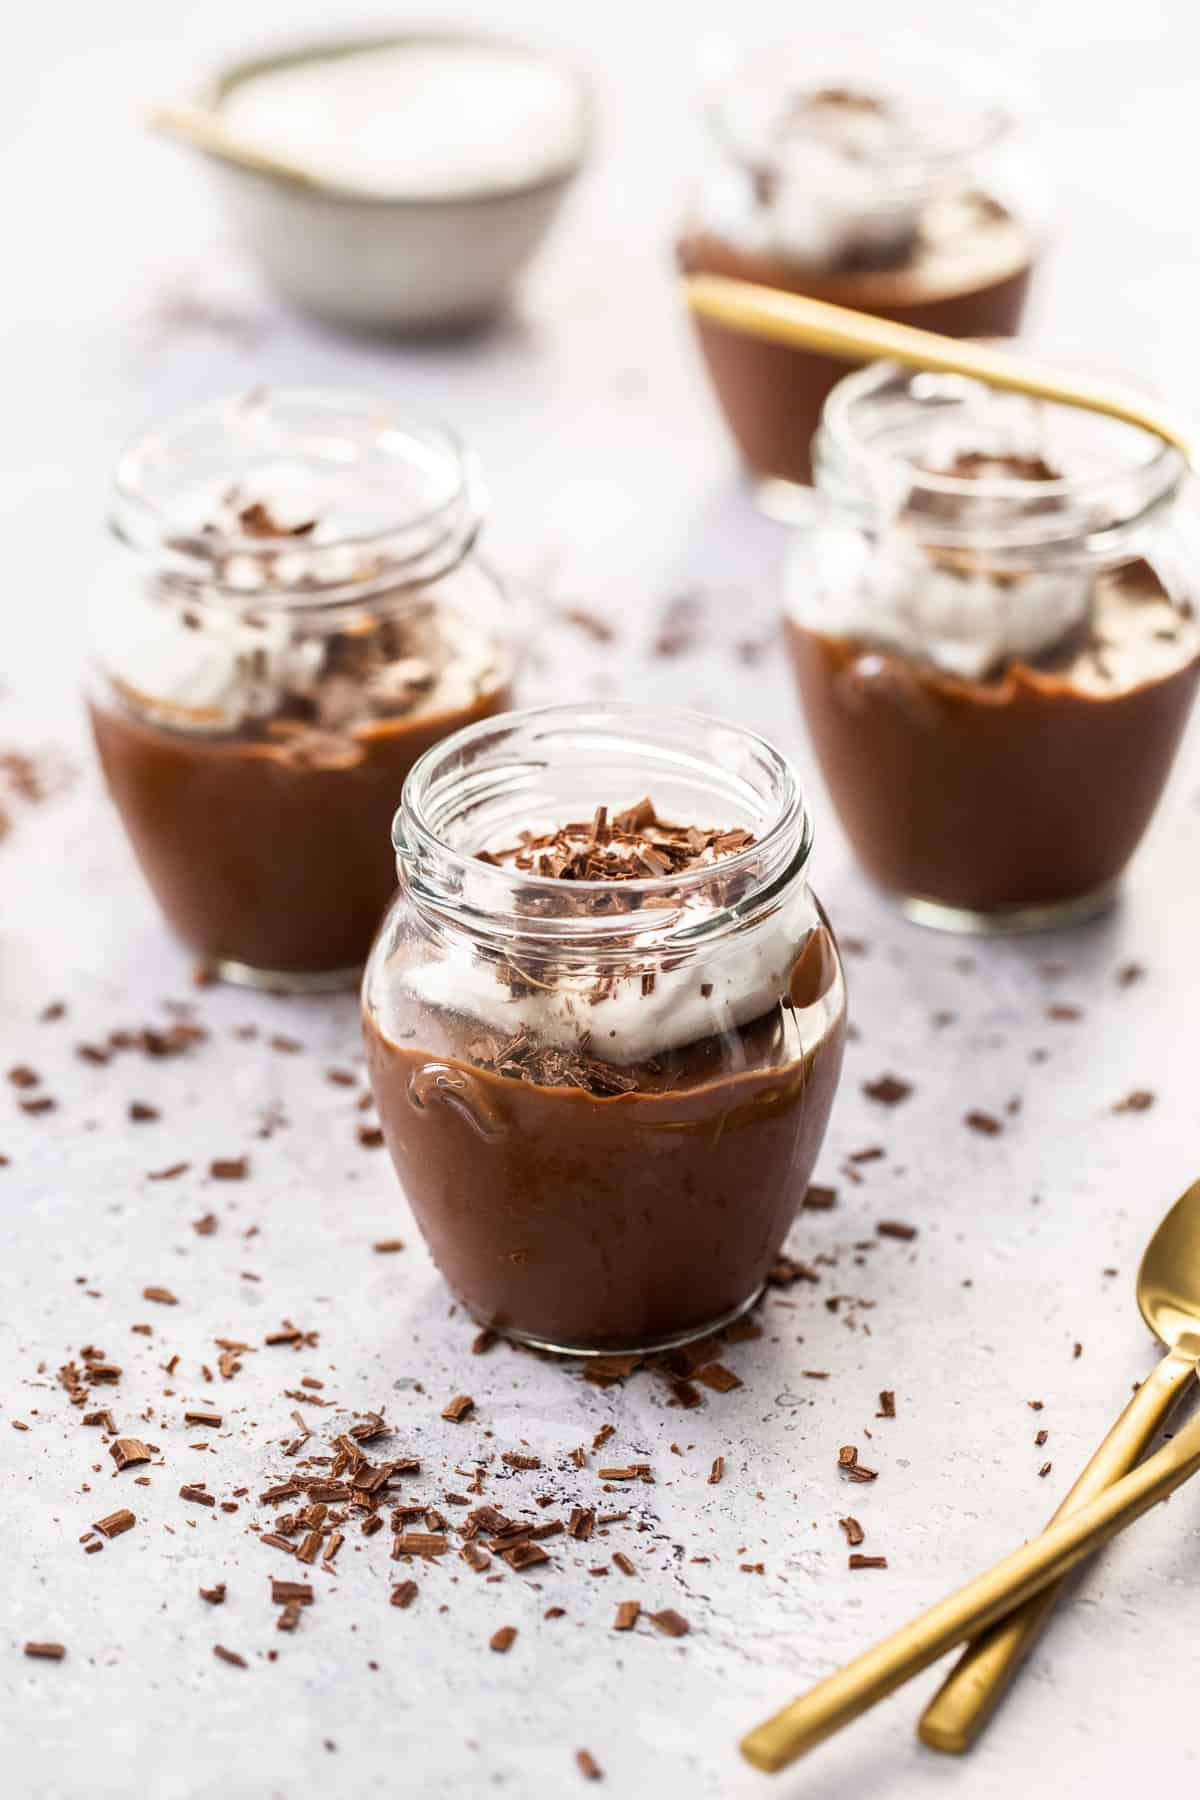 Three jars of mousse, with some gold spoons on the edge of photo.